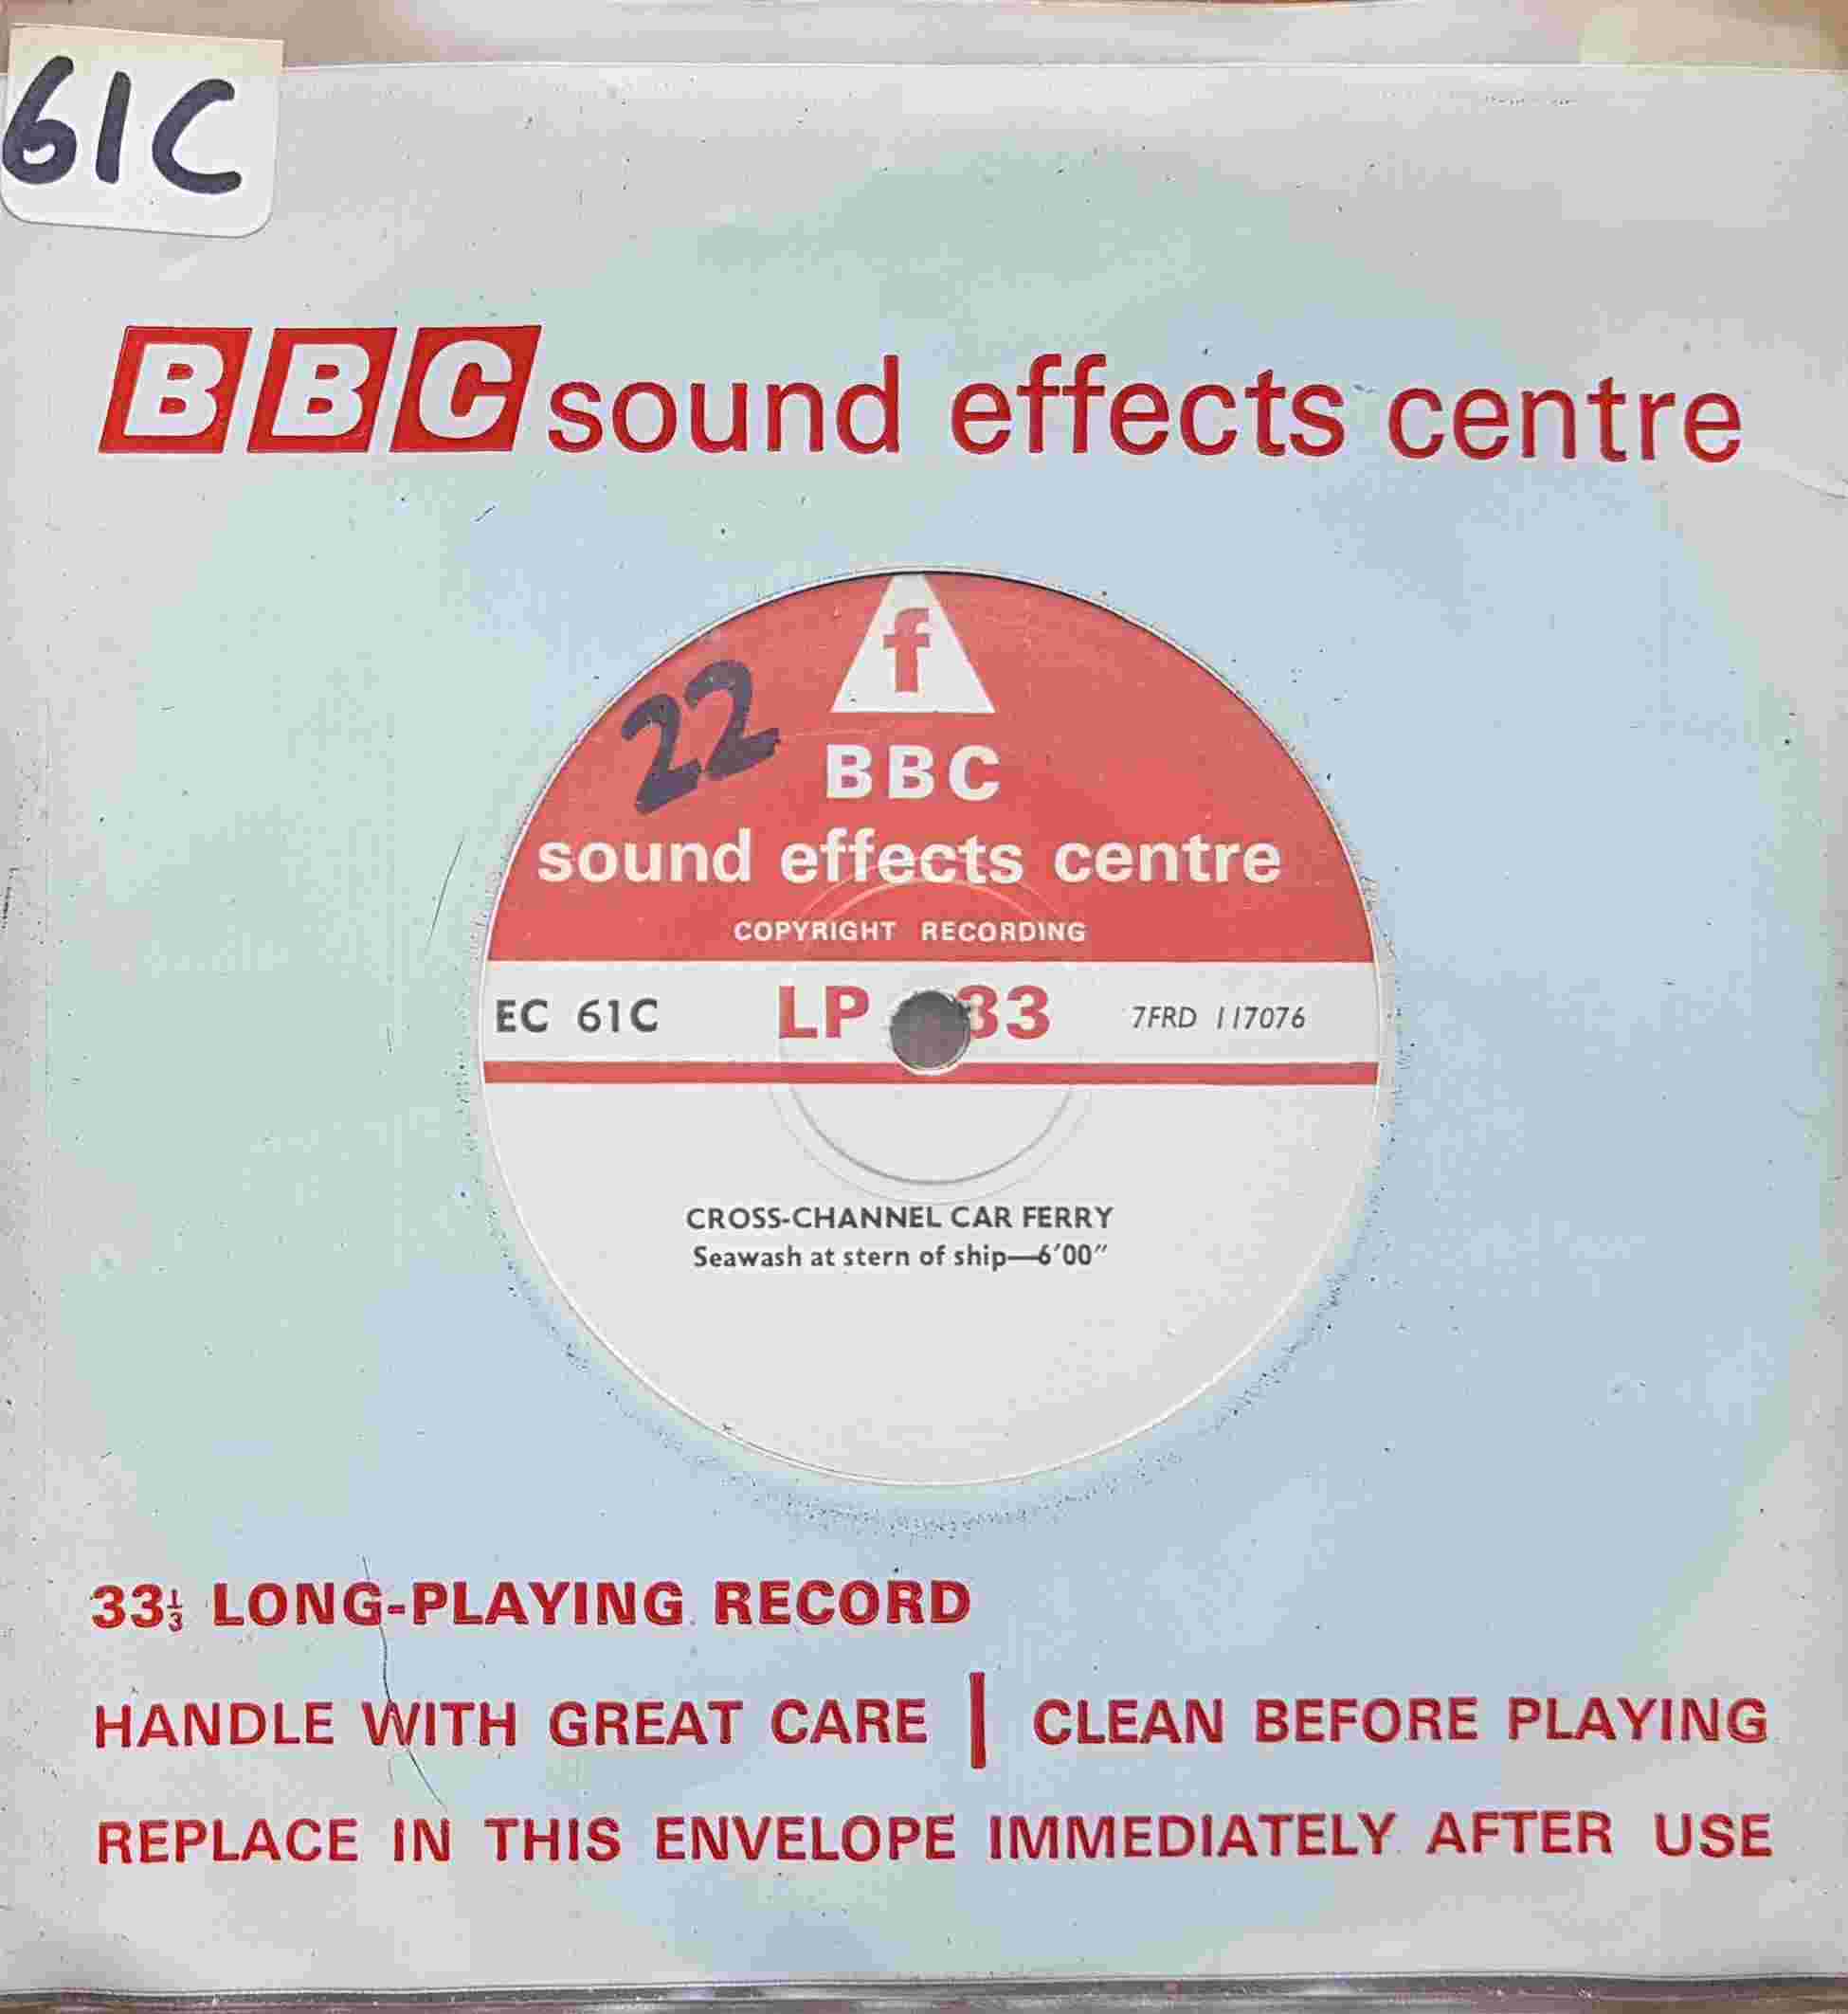 Picture of EC 61C Cross-channel car ferry by artist Not registered from the BBC singles - Records and Tapes library